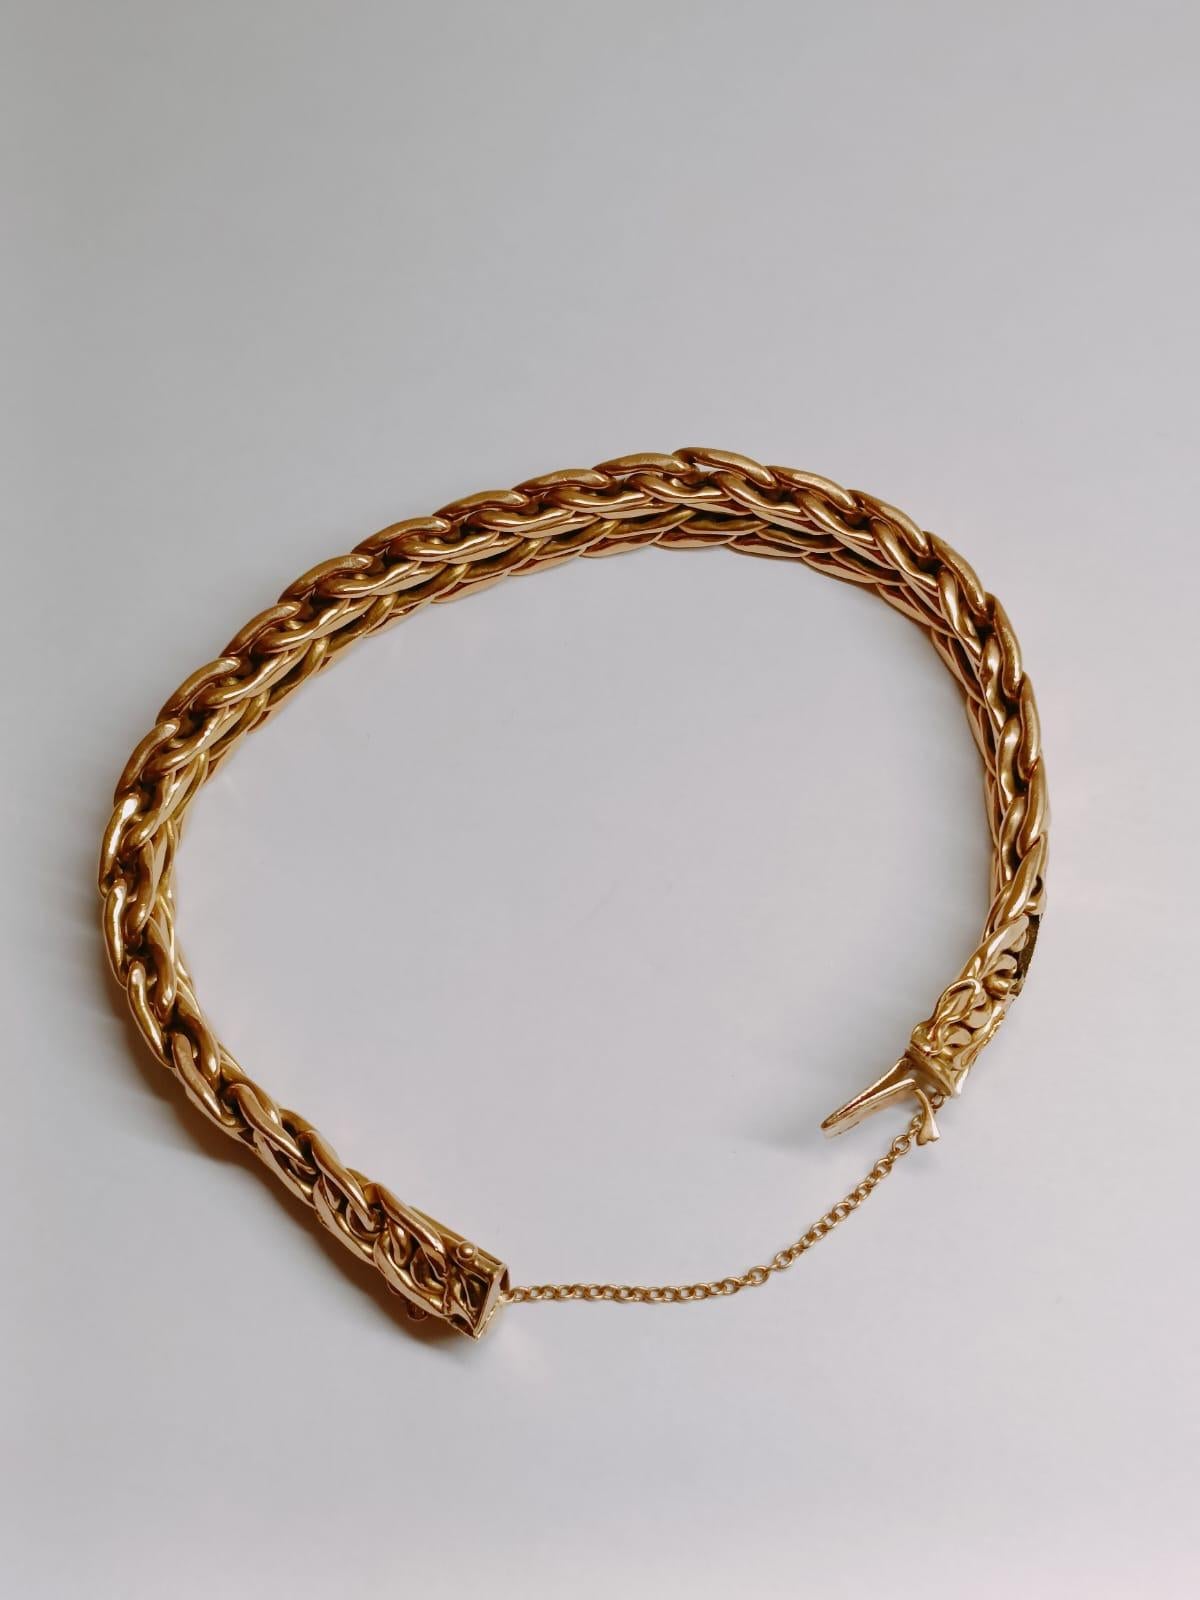 Vintage 18 Karat Gold French Braided Bracelet 1960s In Good Condition For Sale In North Hollywood, CA